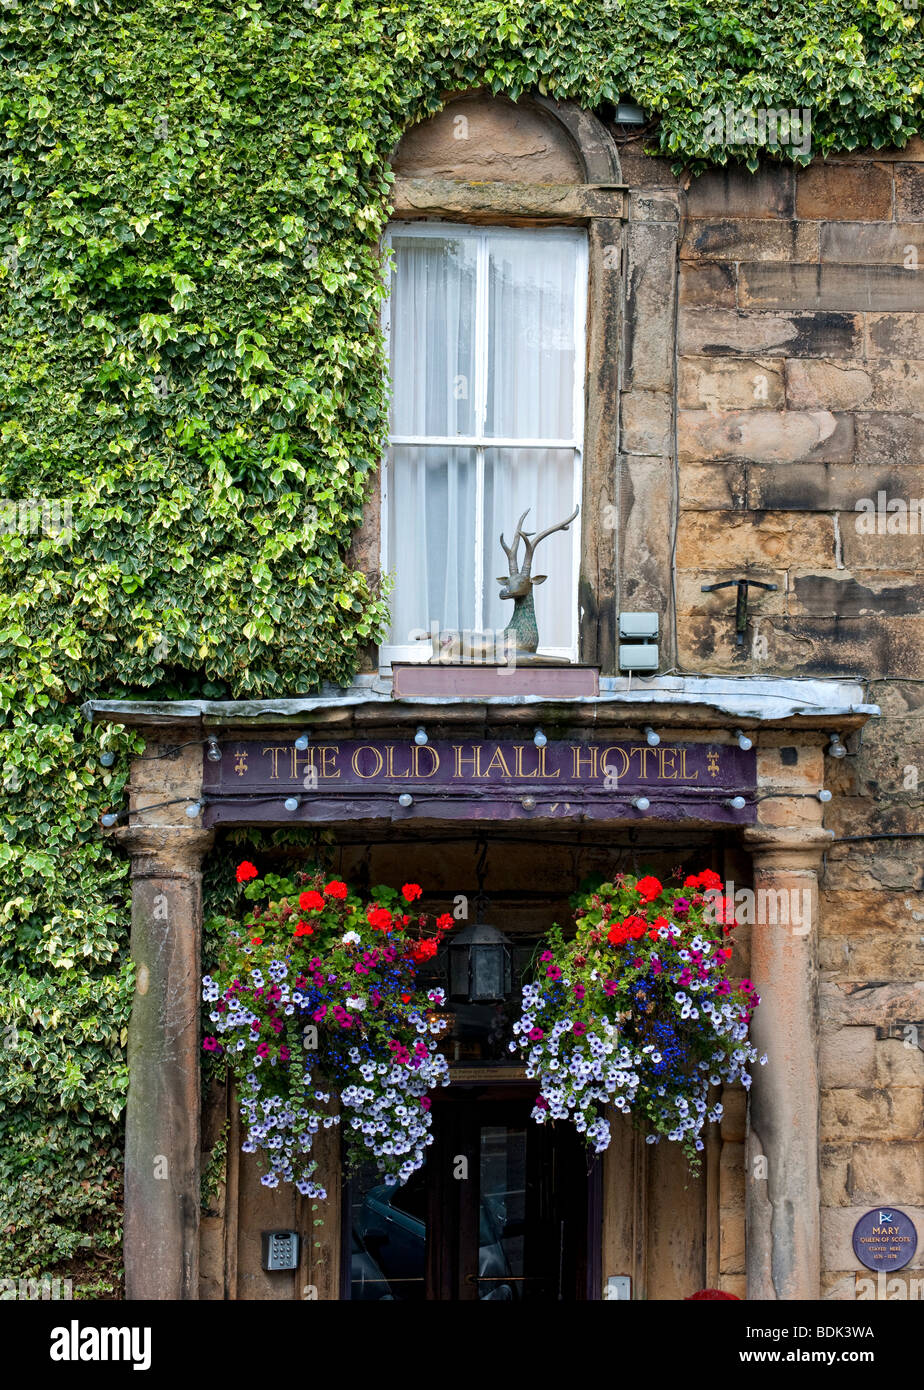 The Old Hall Hotel in Buxton, Derbyshire, England Stock Photo